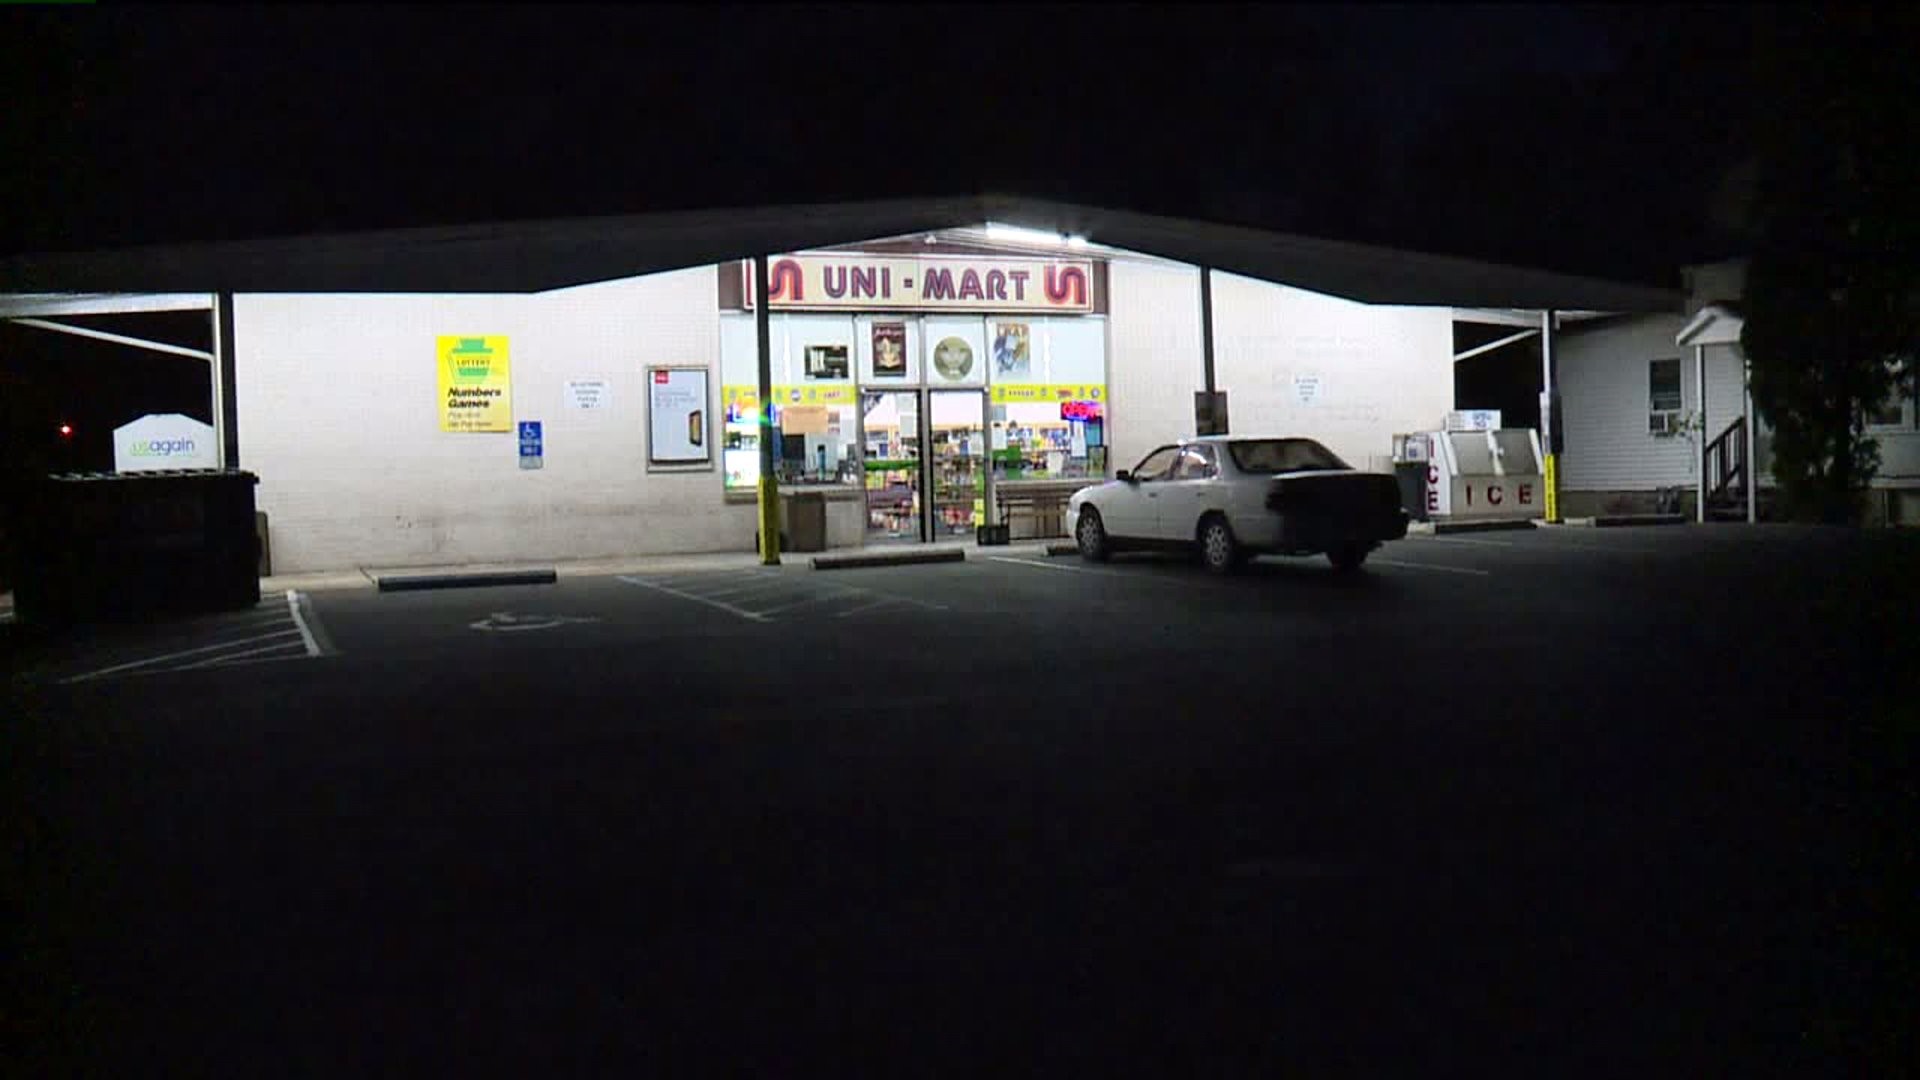 Police: One Dead, Another Hurt After Shooting at Mini-Mart in Williamsport